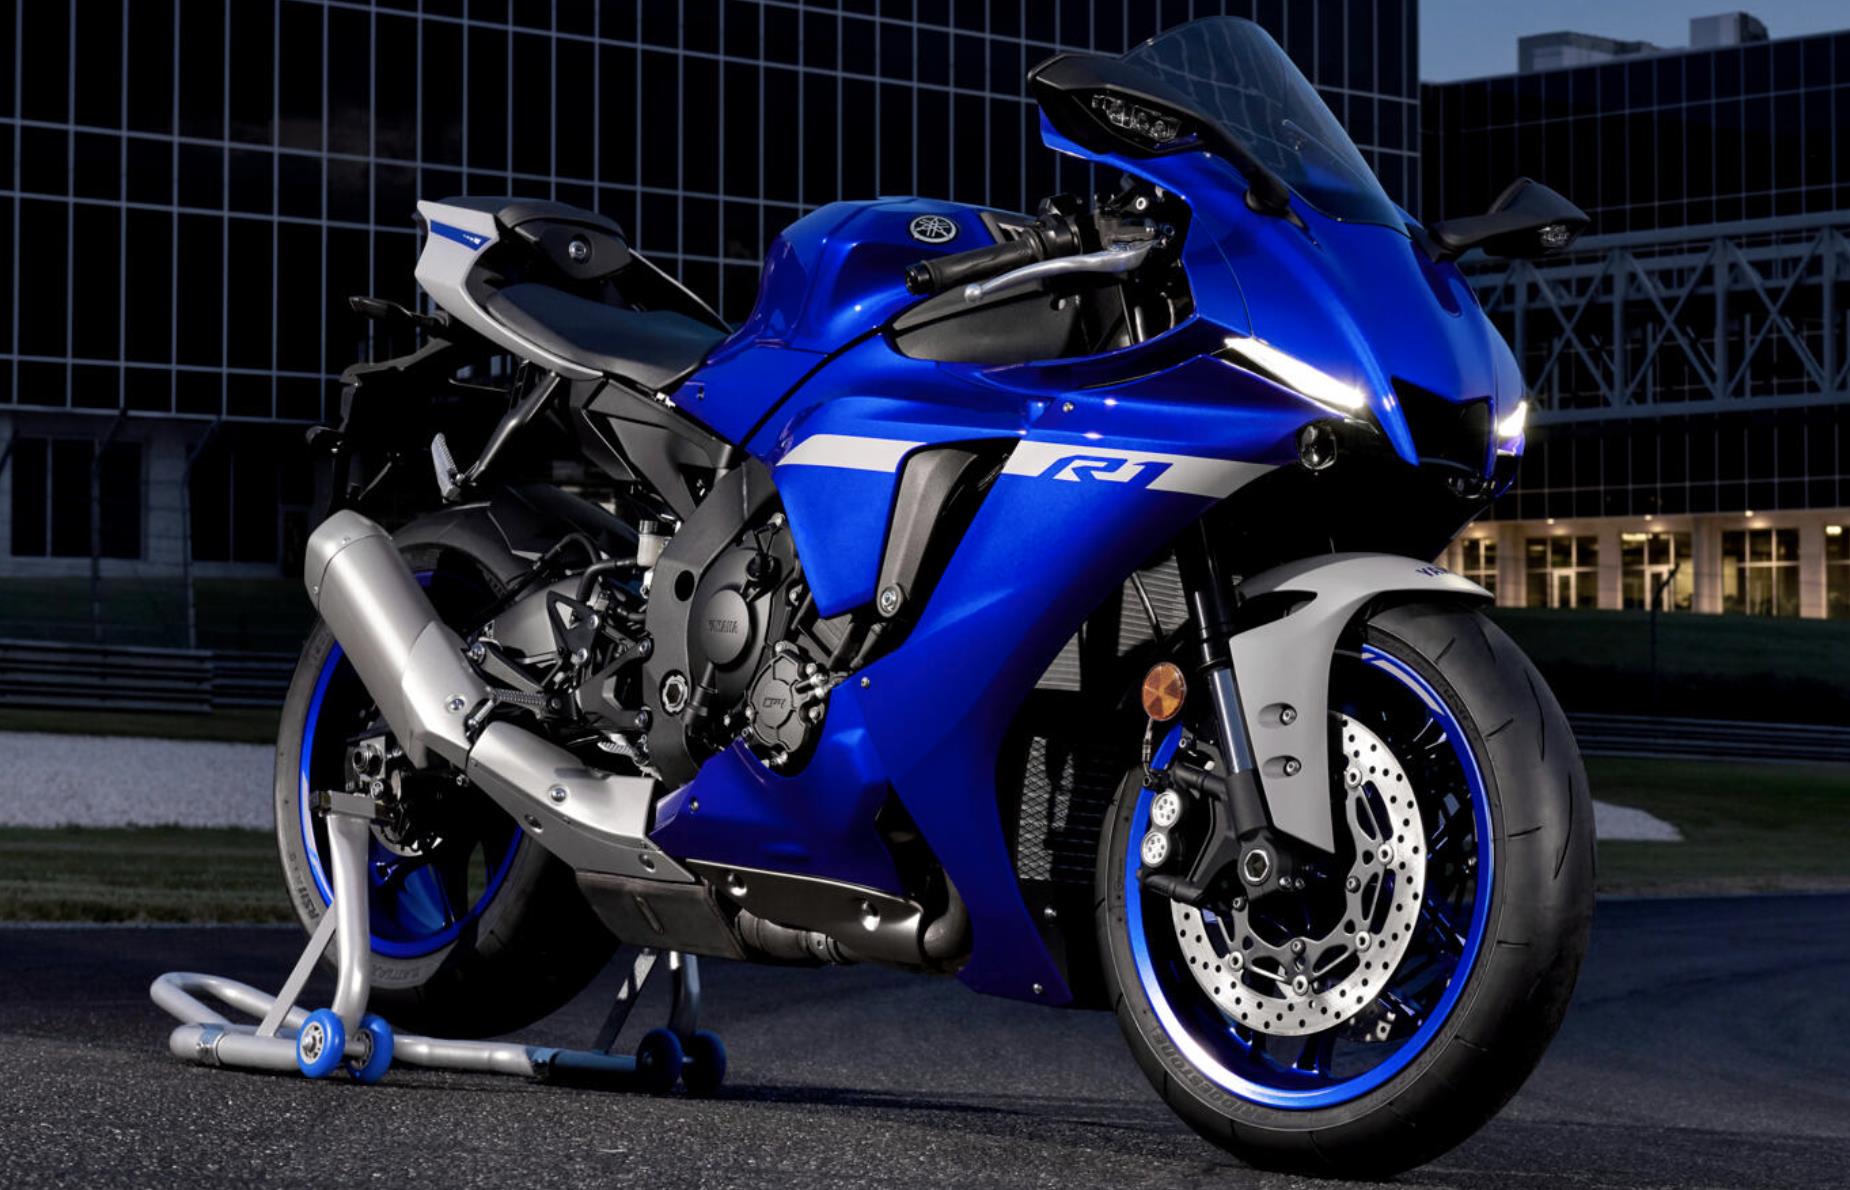 2022 Yamaha YZF-R1 Specifications and Expected Price in India